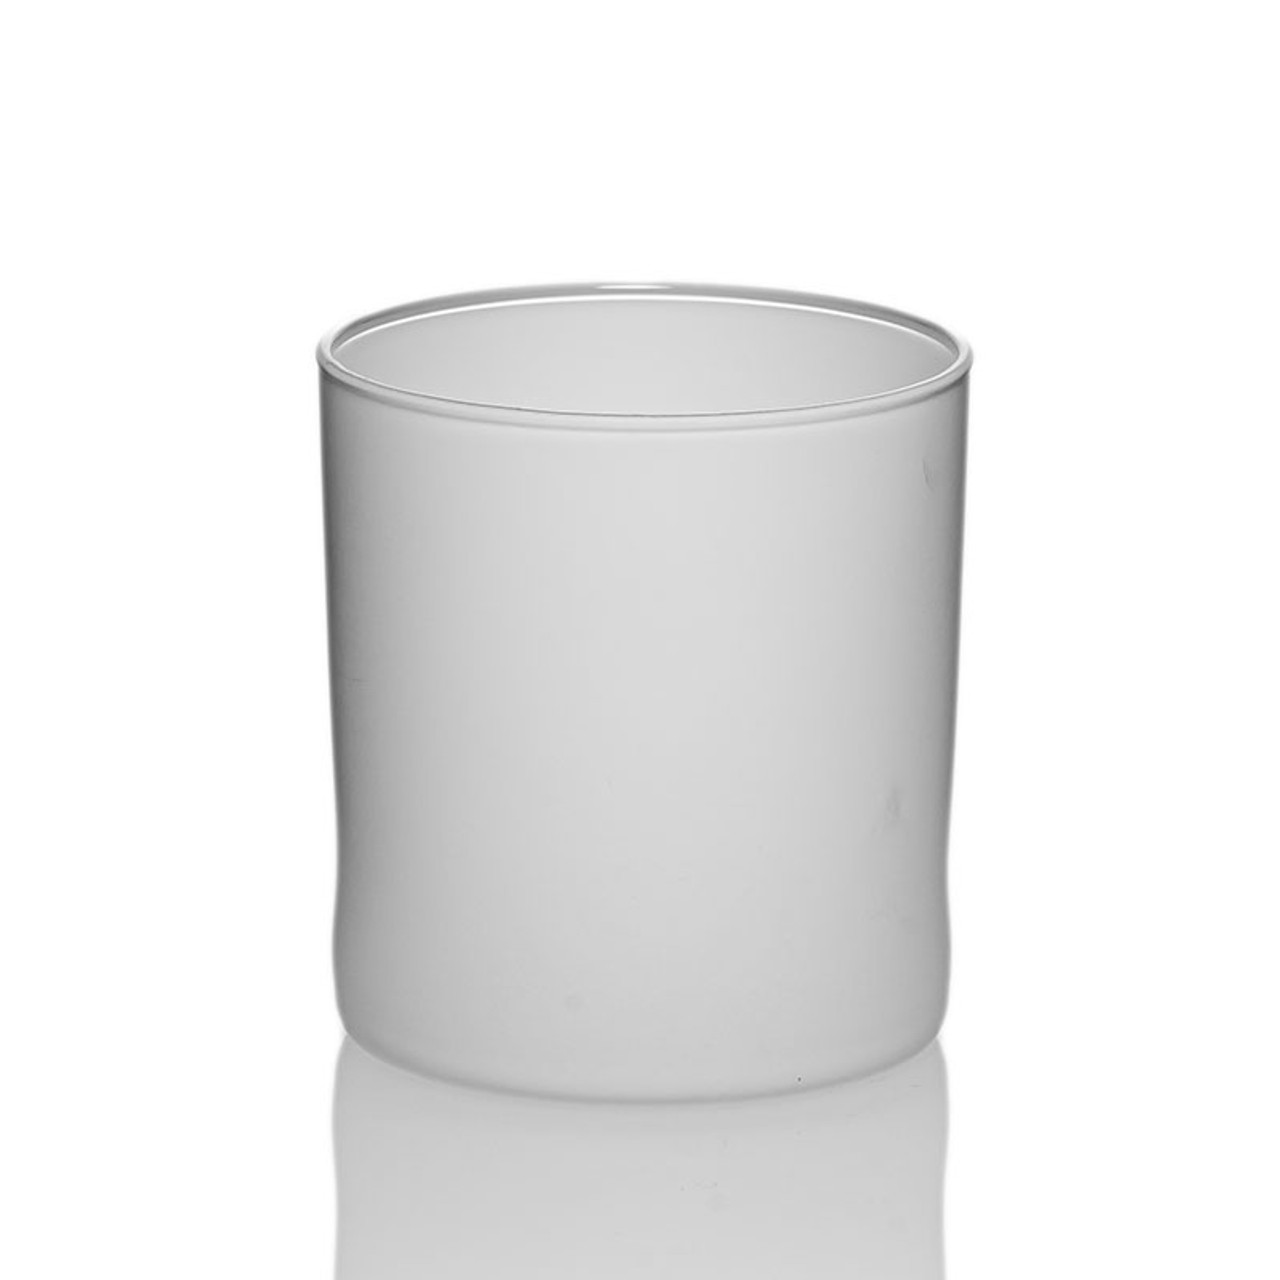 Libbey Candle Container, 12.5 Ounce -- 36 per case.